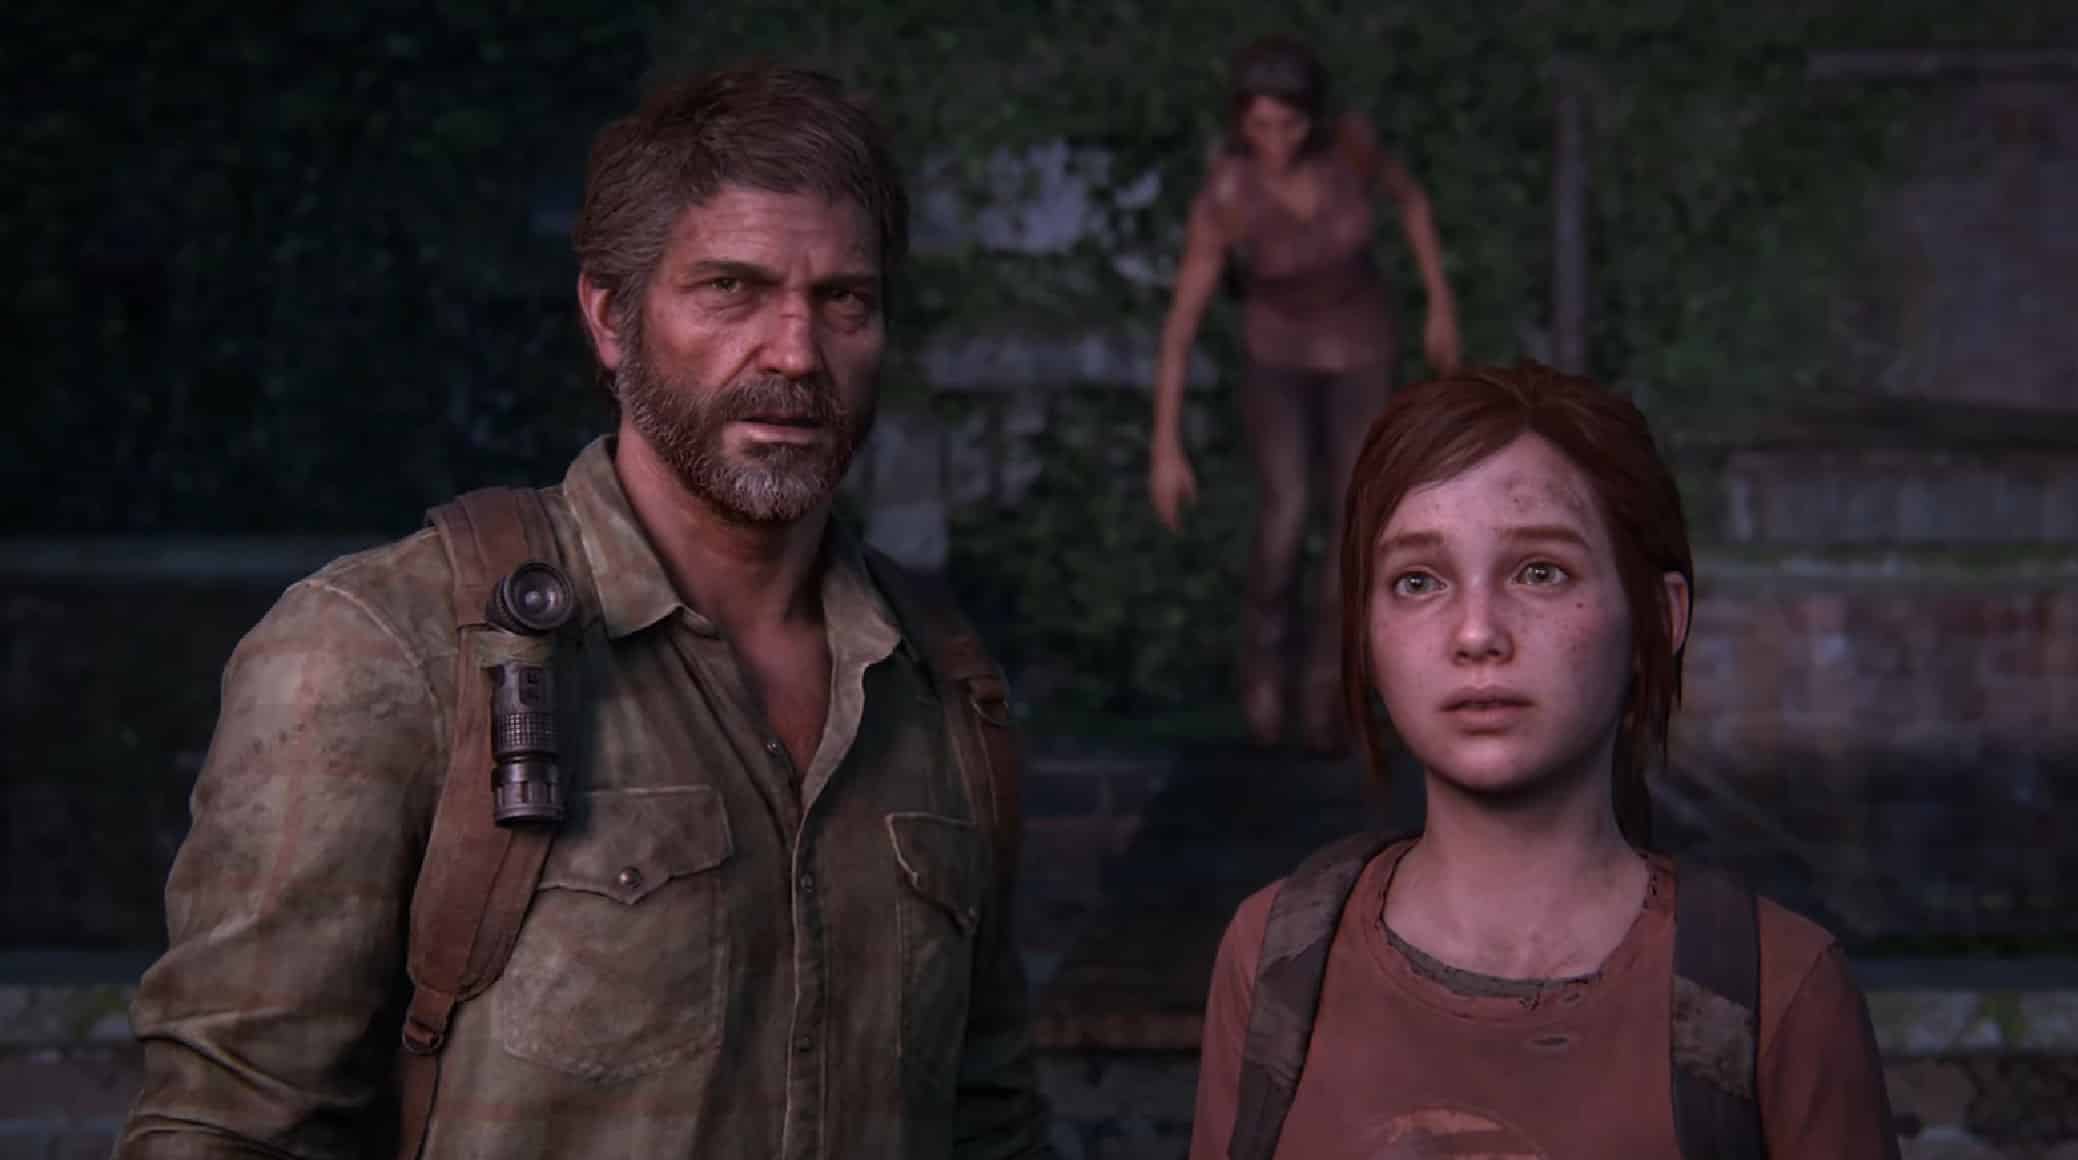 The Last of Us Part II Remastered vs Original PS5 Early Graphics Comparison  